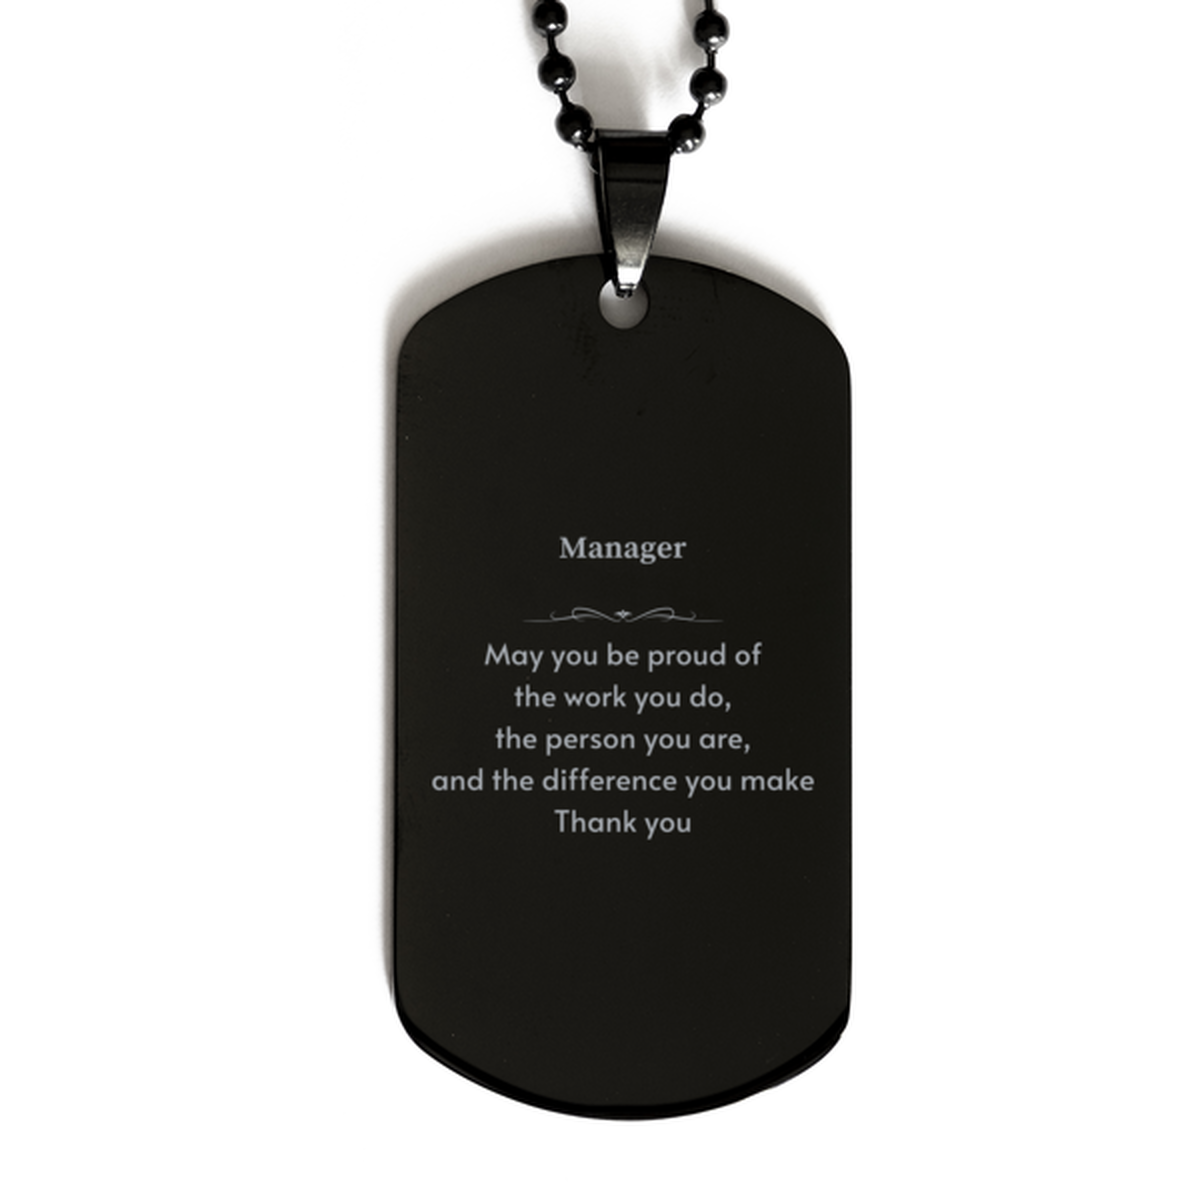 Heartwarming Black Dog Tag Retirement Coworkers Gifts for Manager, Manager May You be proud of the work you do, the person you are Gifts for Boss Men Women Friends